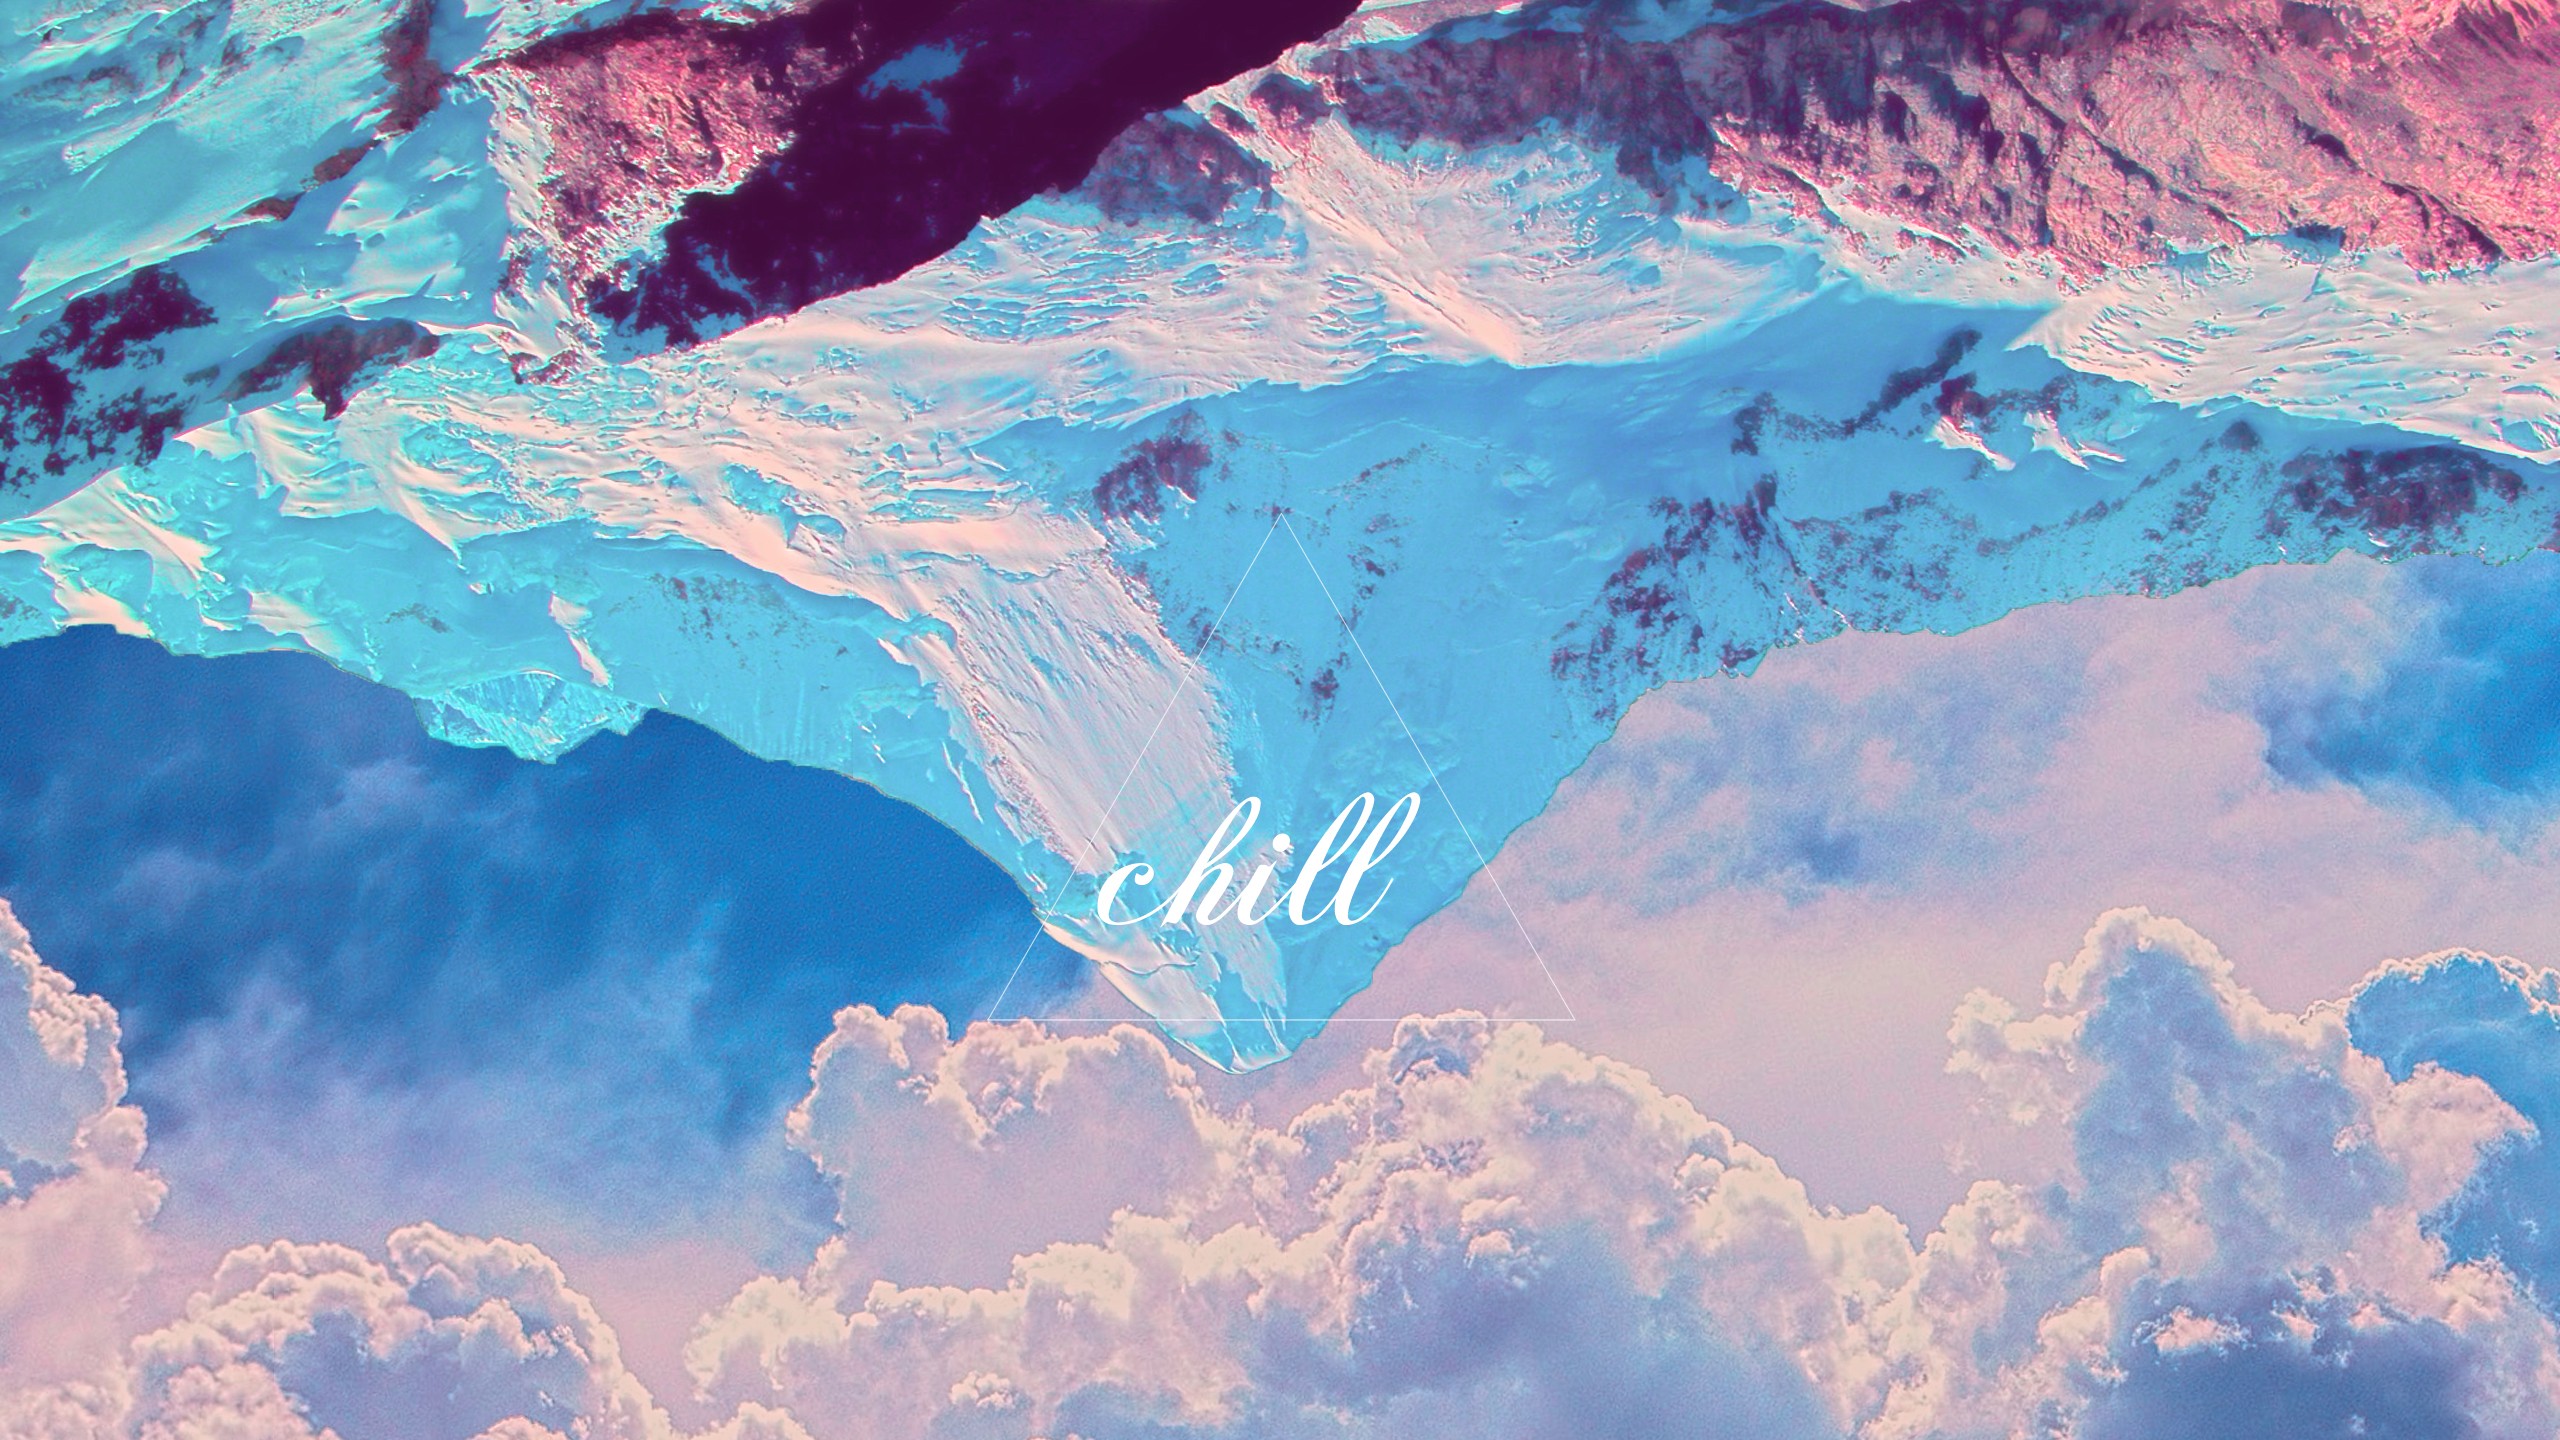 40+ Chill wallpapers ·① Download free stunning full HD ...